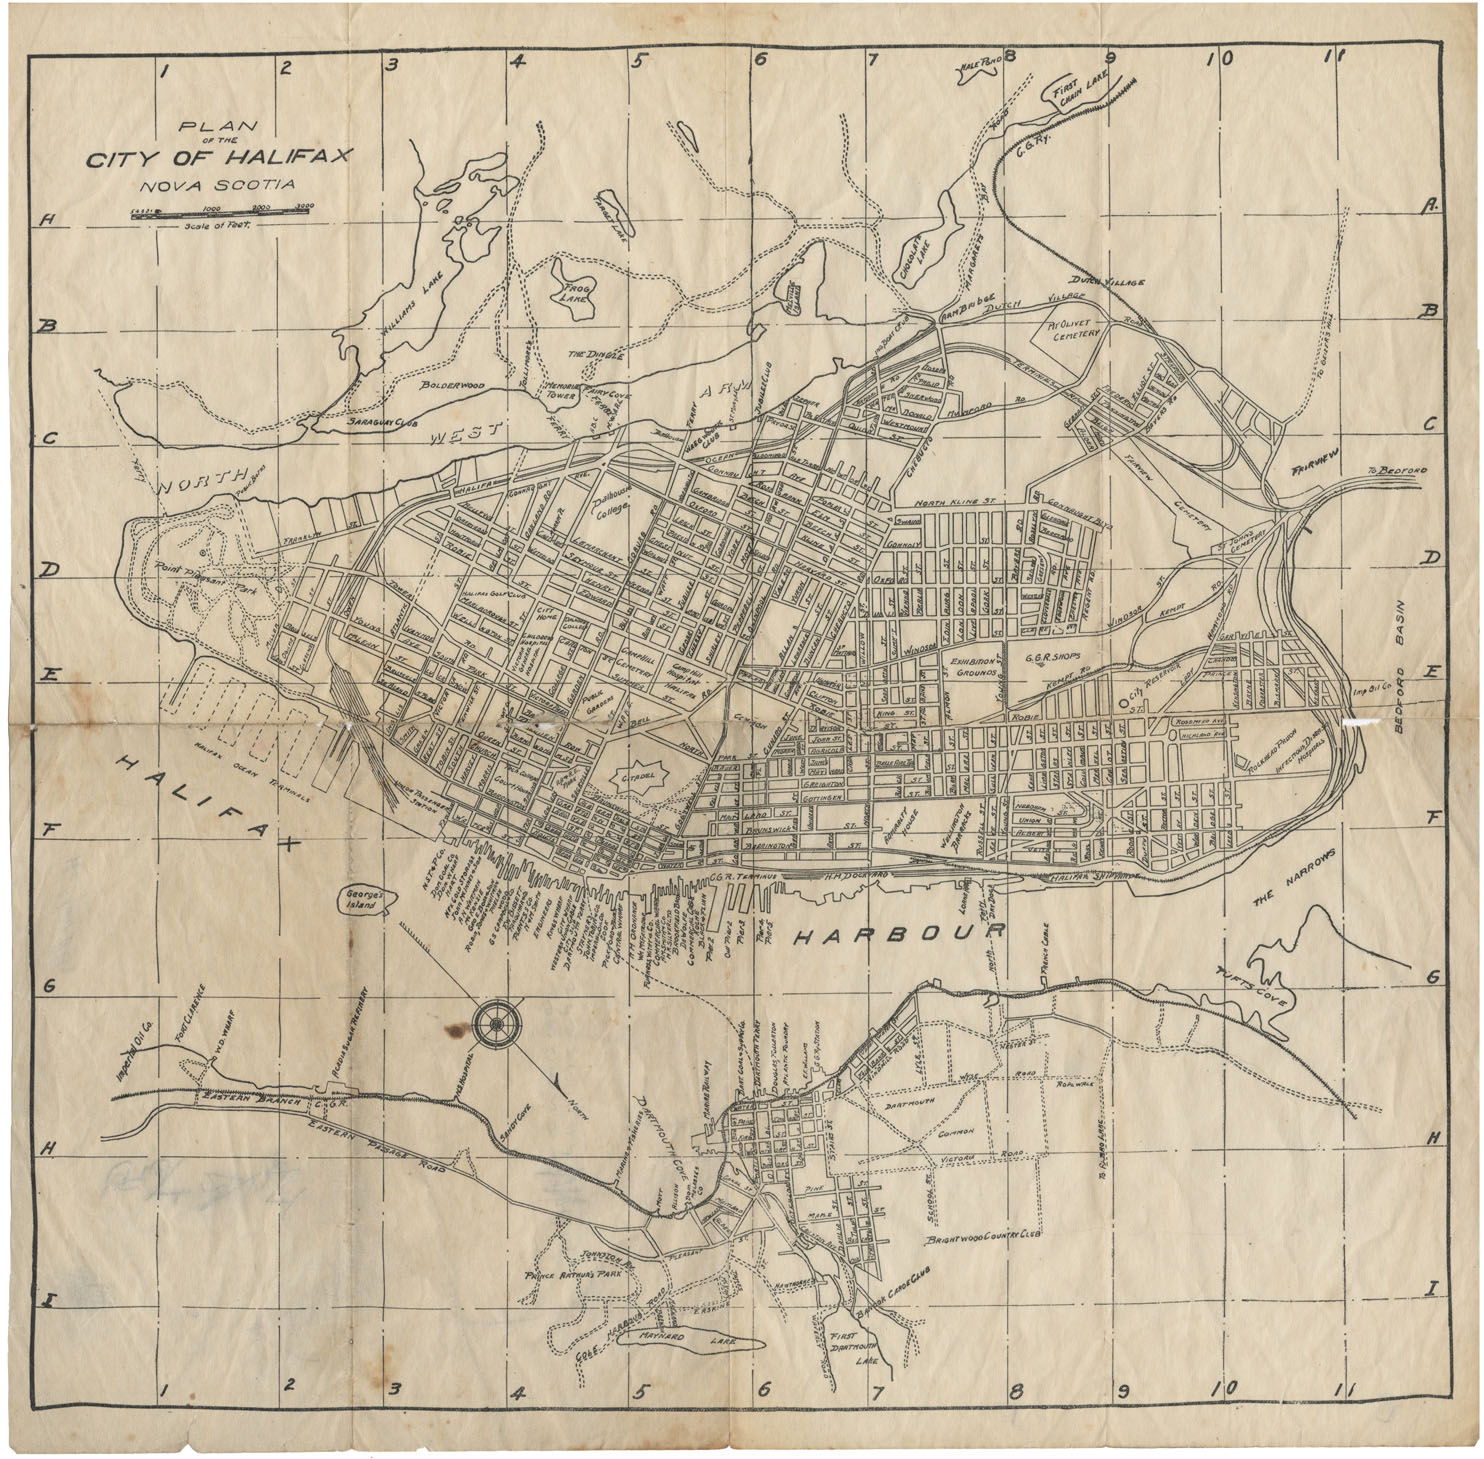 Plan of the City of Halifax, N.S.